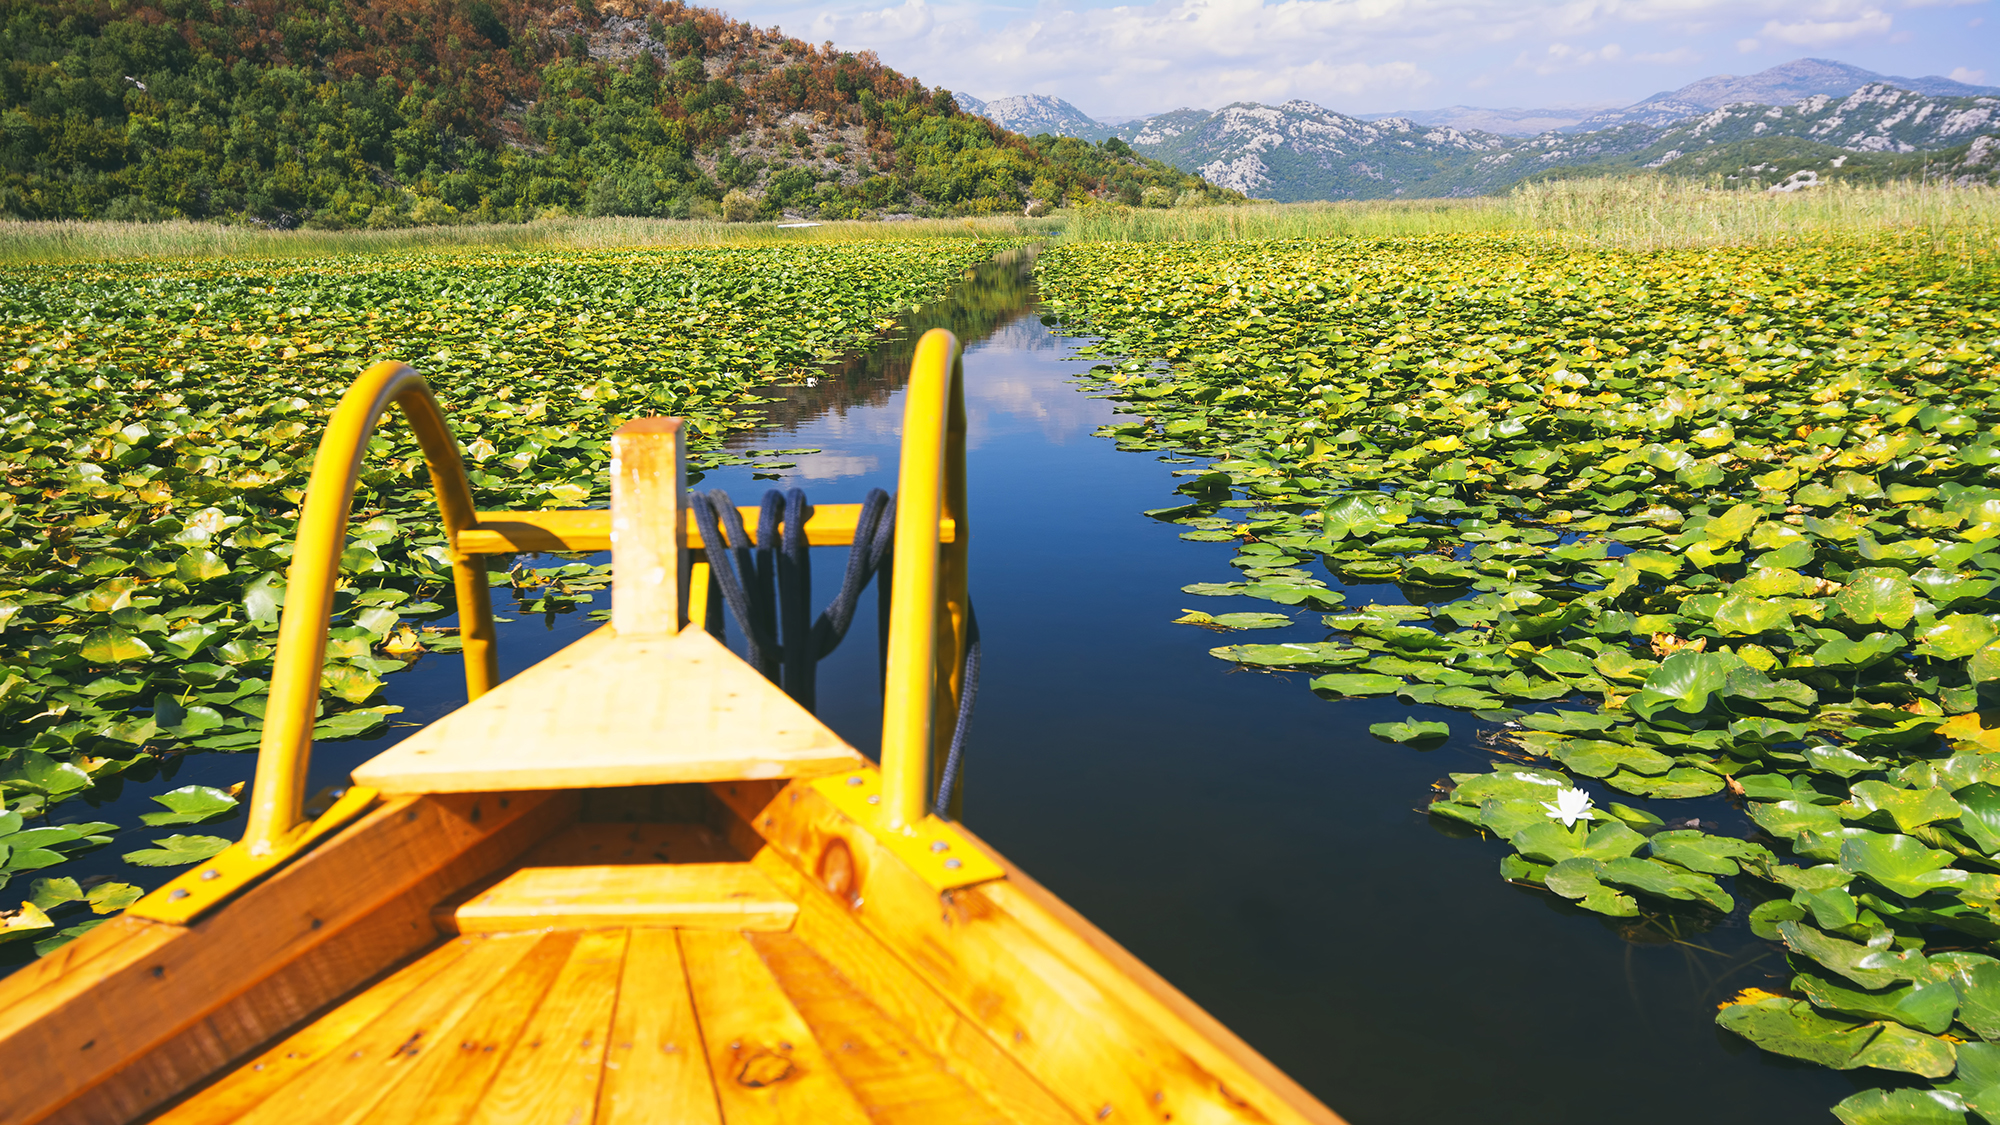 Lake trip among water lilies and mountains on a wooden boat (Skadar Lake National Park, Montenegro)